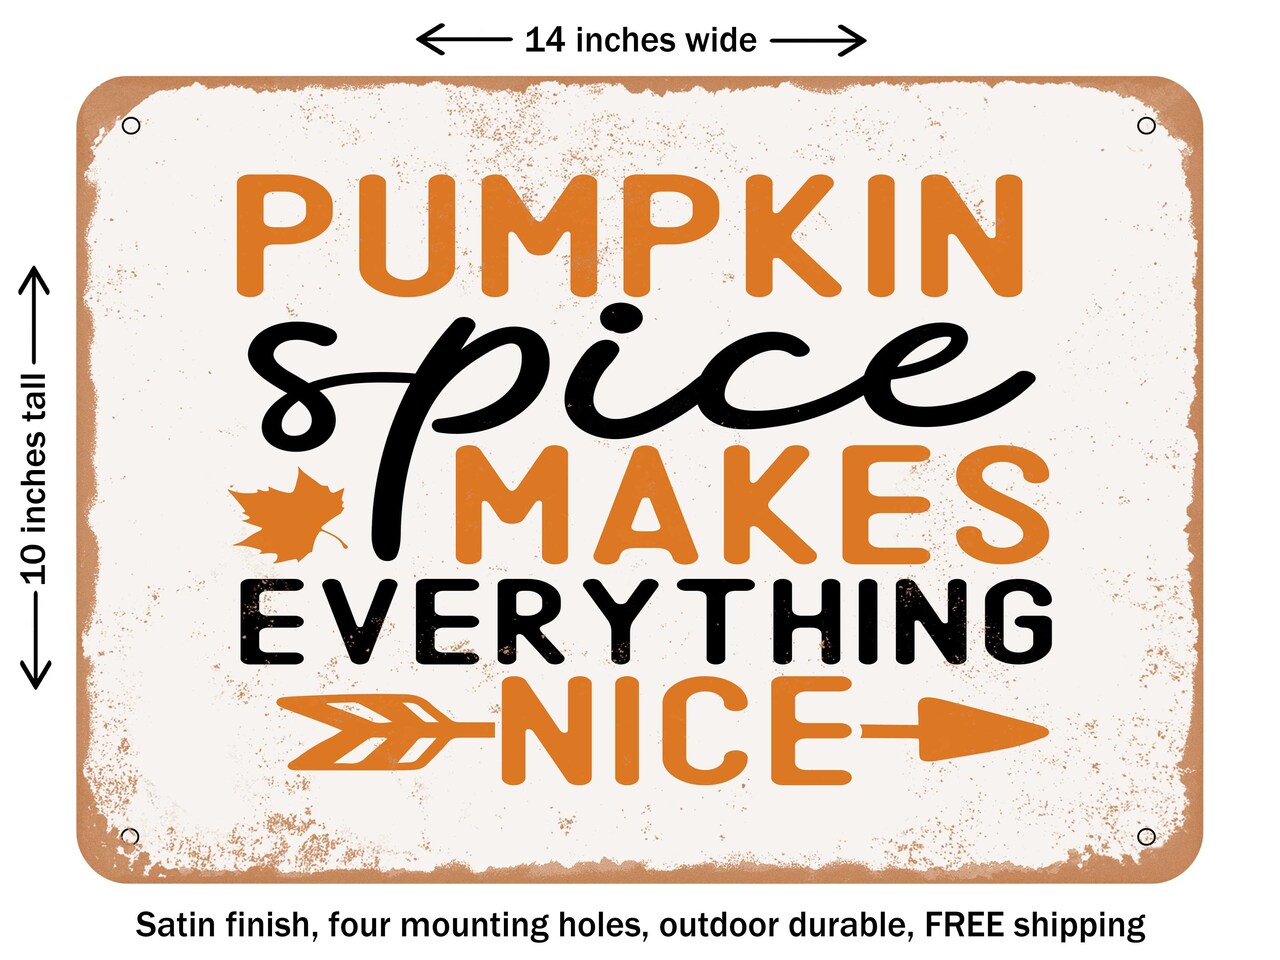 DECORATIVE METAL SIGN - Pumpkin Spice Makes Everything Nice - Vintage Rusty Look